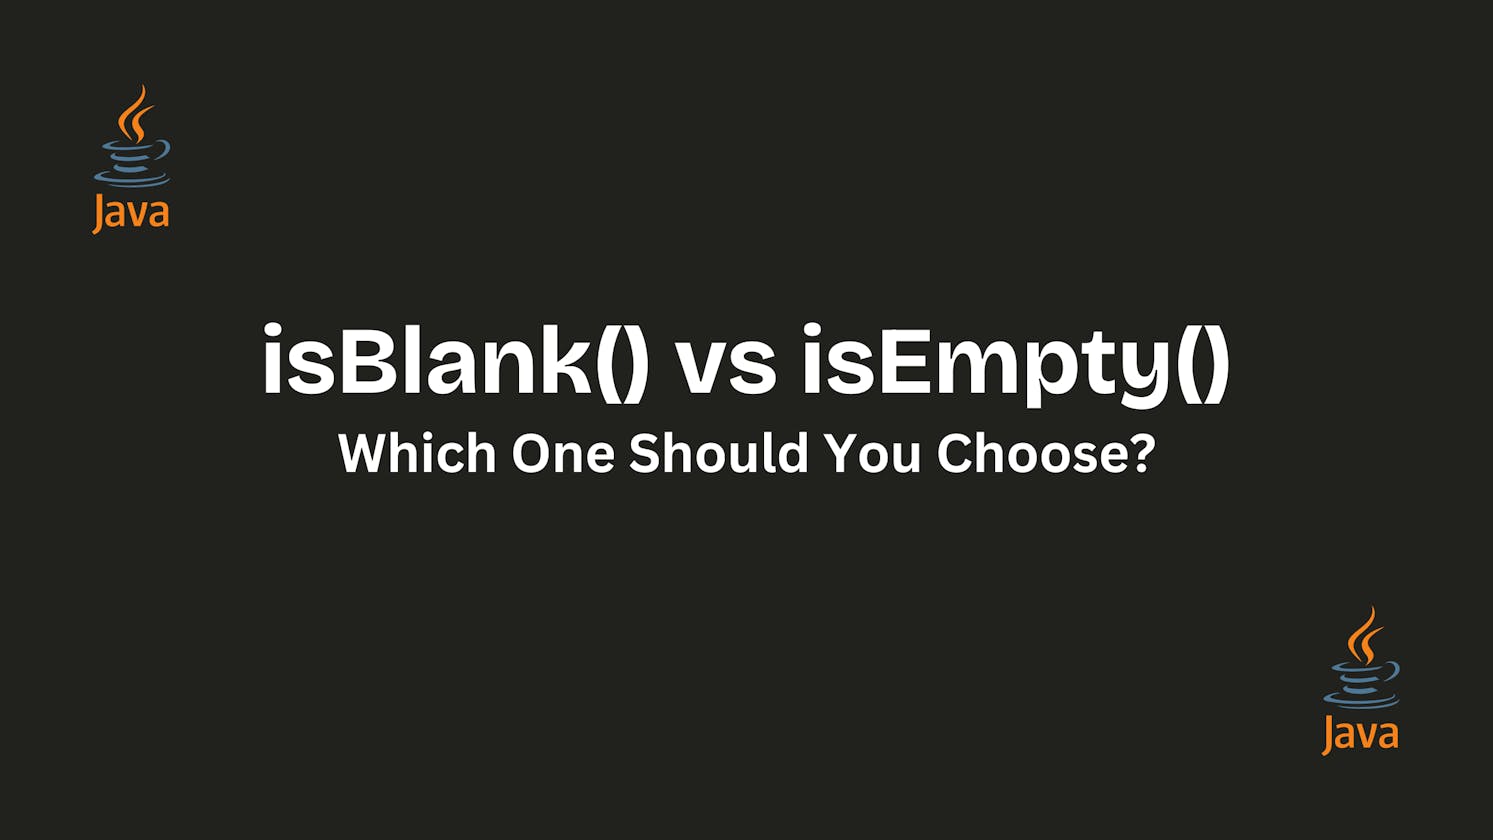 "isBlank() vs. isEmpty() – Which One Should You Choose?"